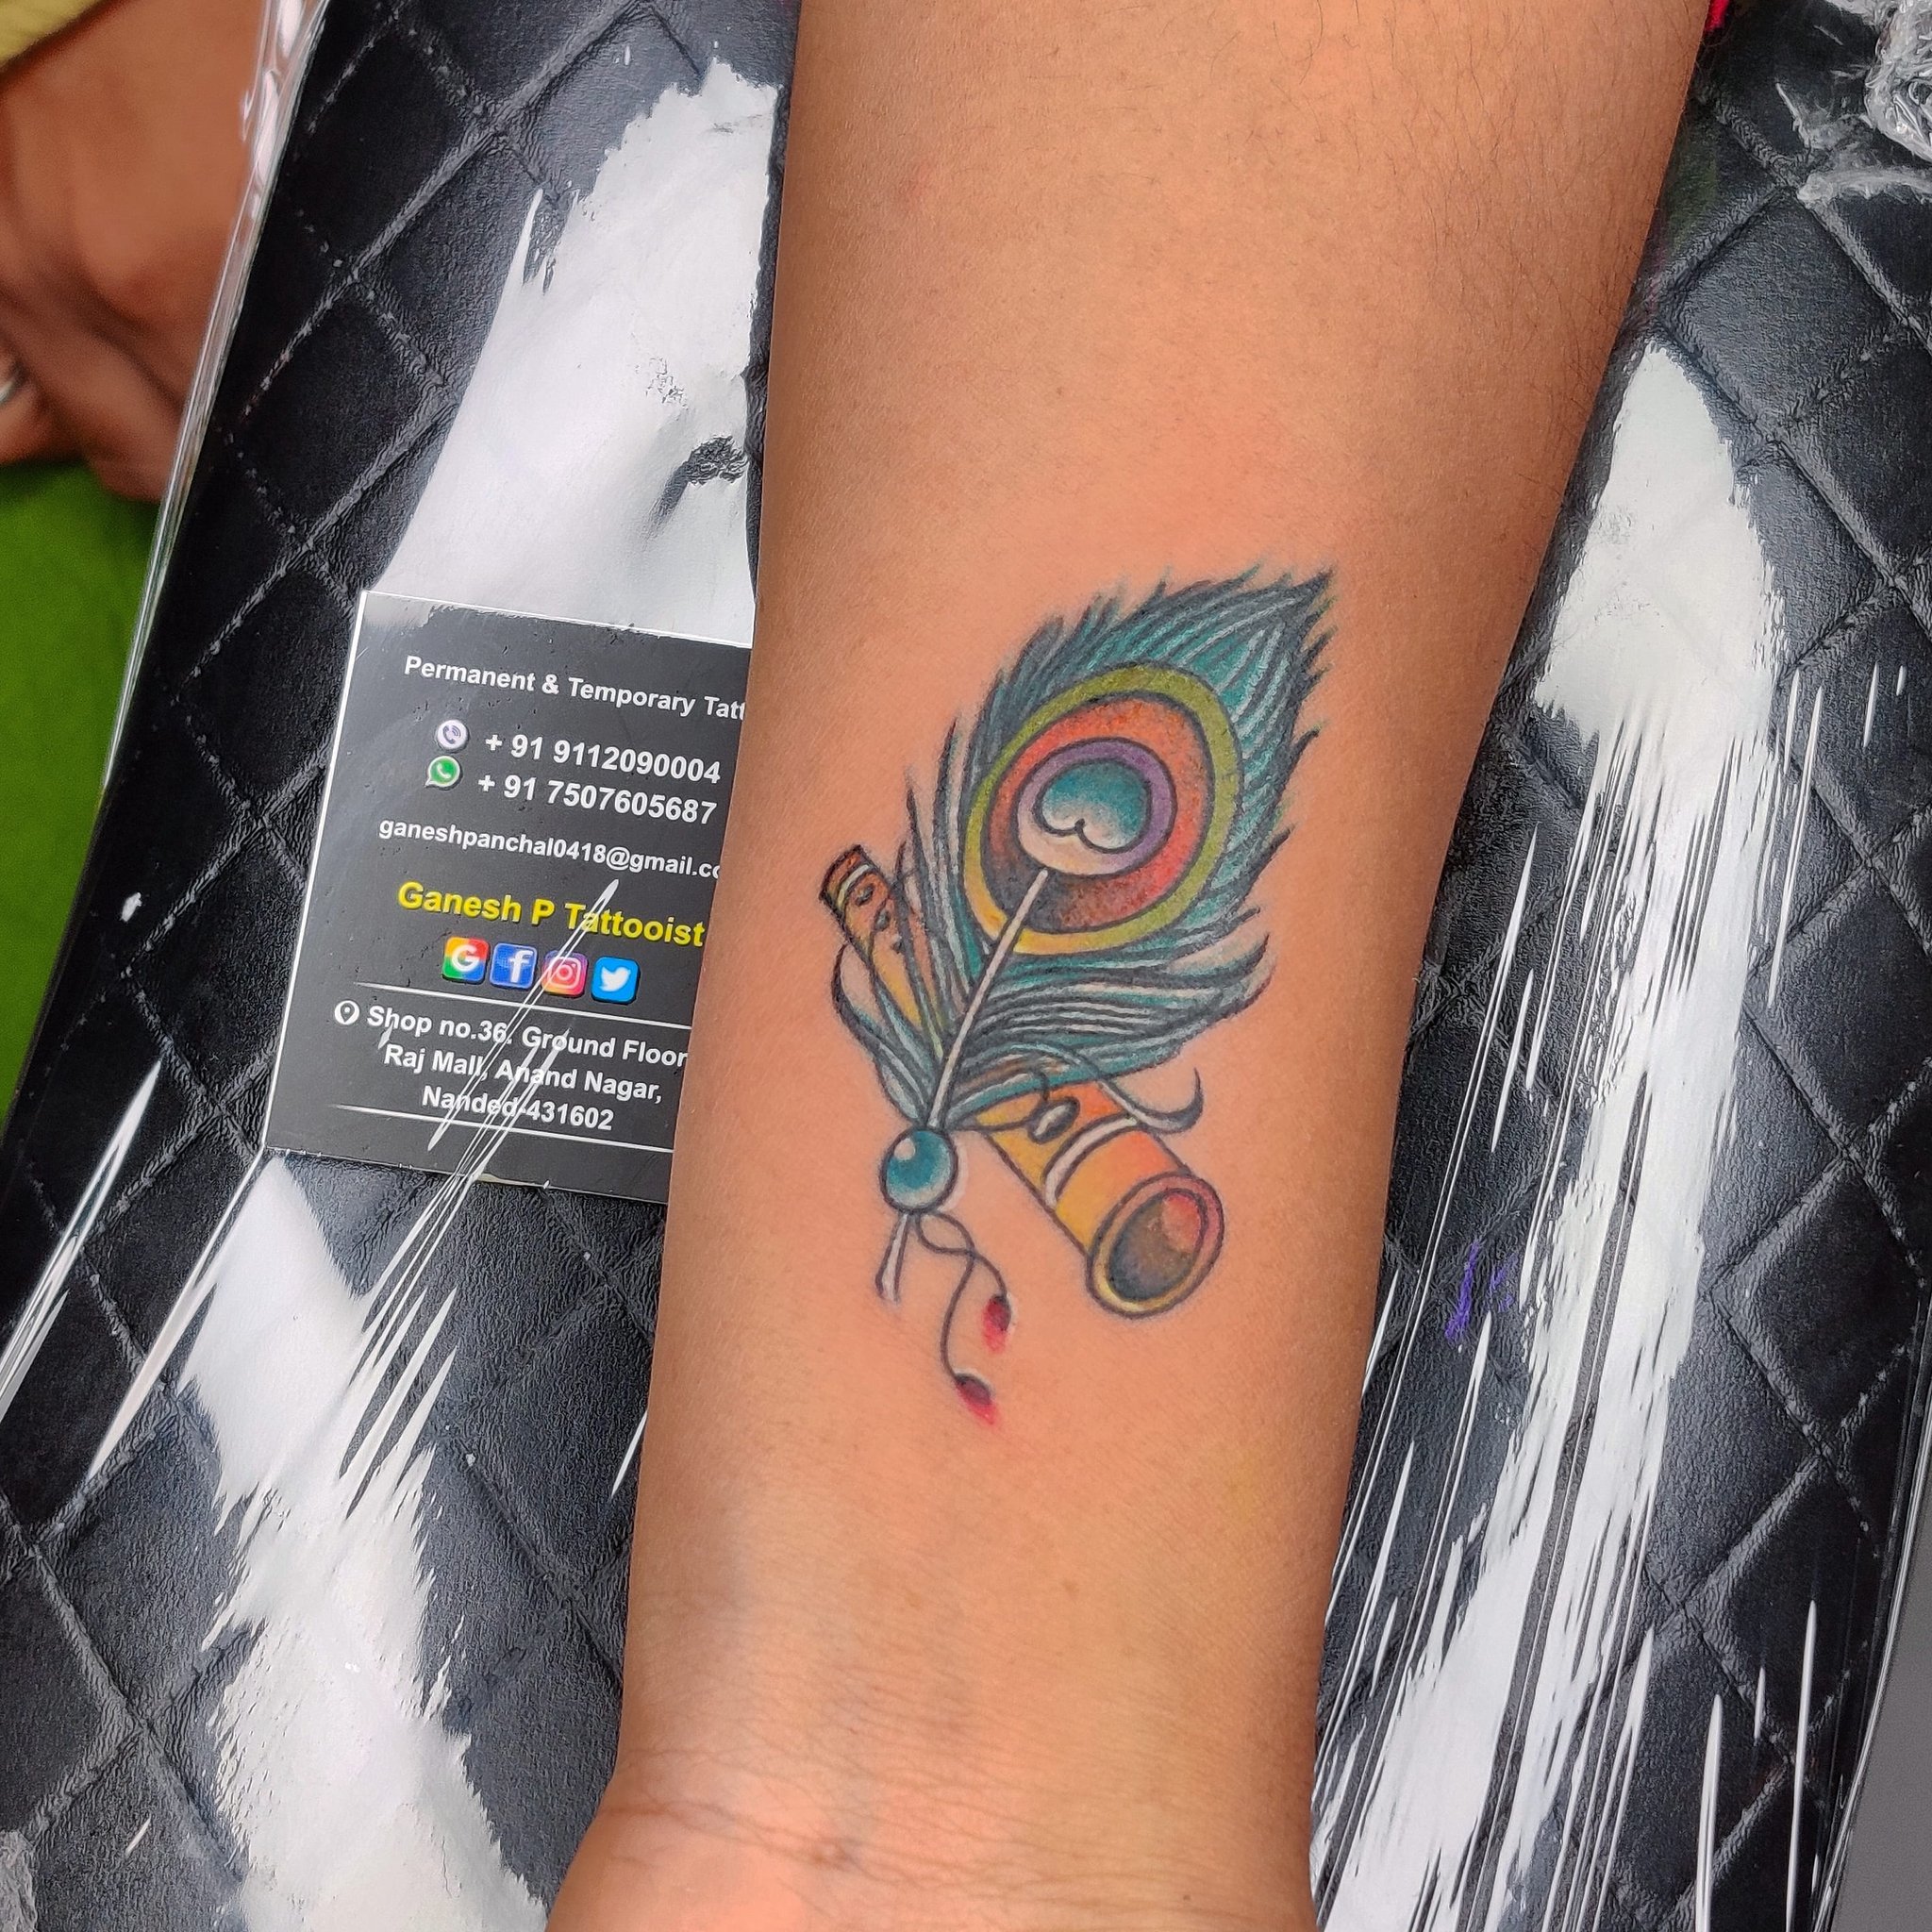 1991 tattoos - Peacock Feather tattoo design complete today...create by  MR.AK..1991TATTOOS viman nagar pune | Facebook